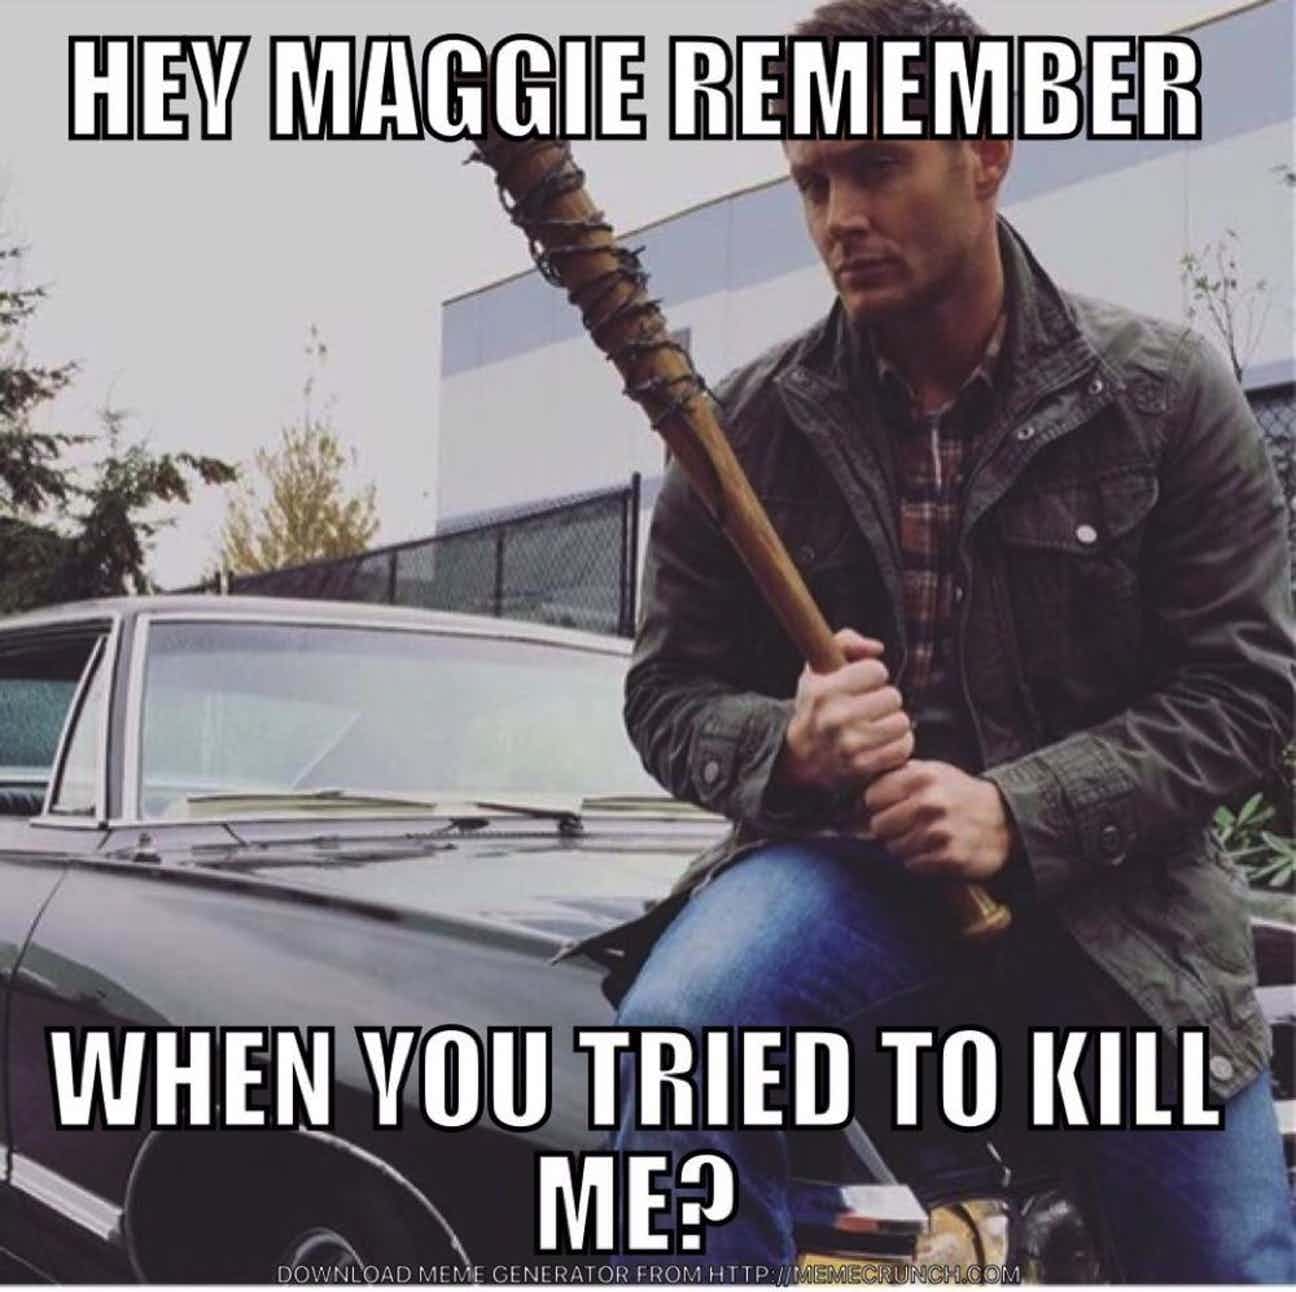 http://theawesomedaily.com/wp-content/uploads/2017/03/supernatural-memes-8-1.jpg